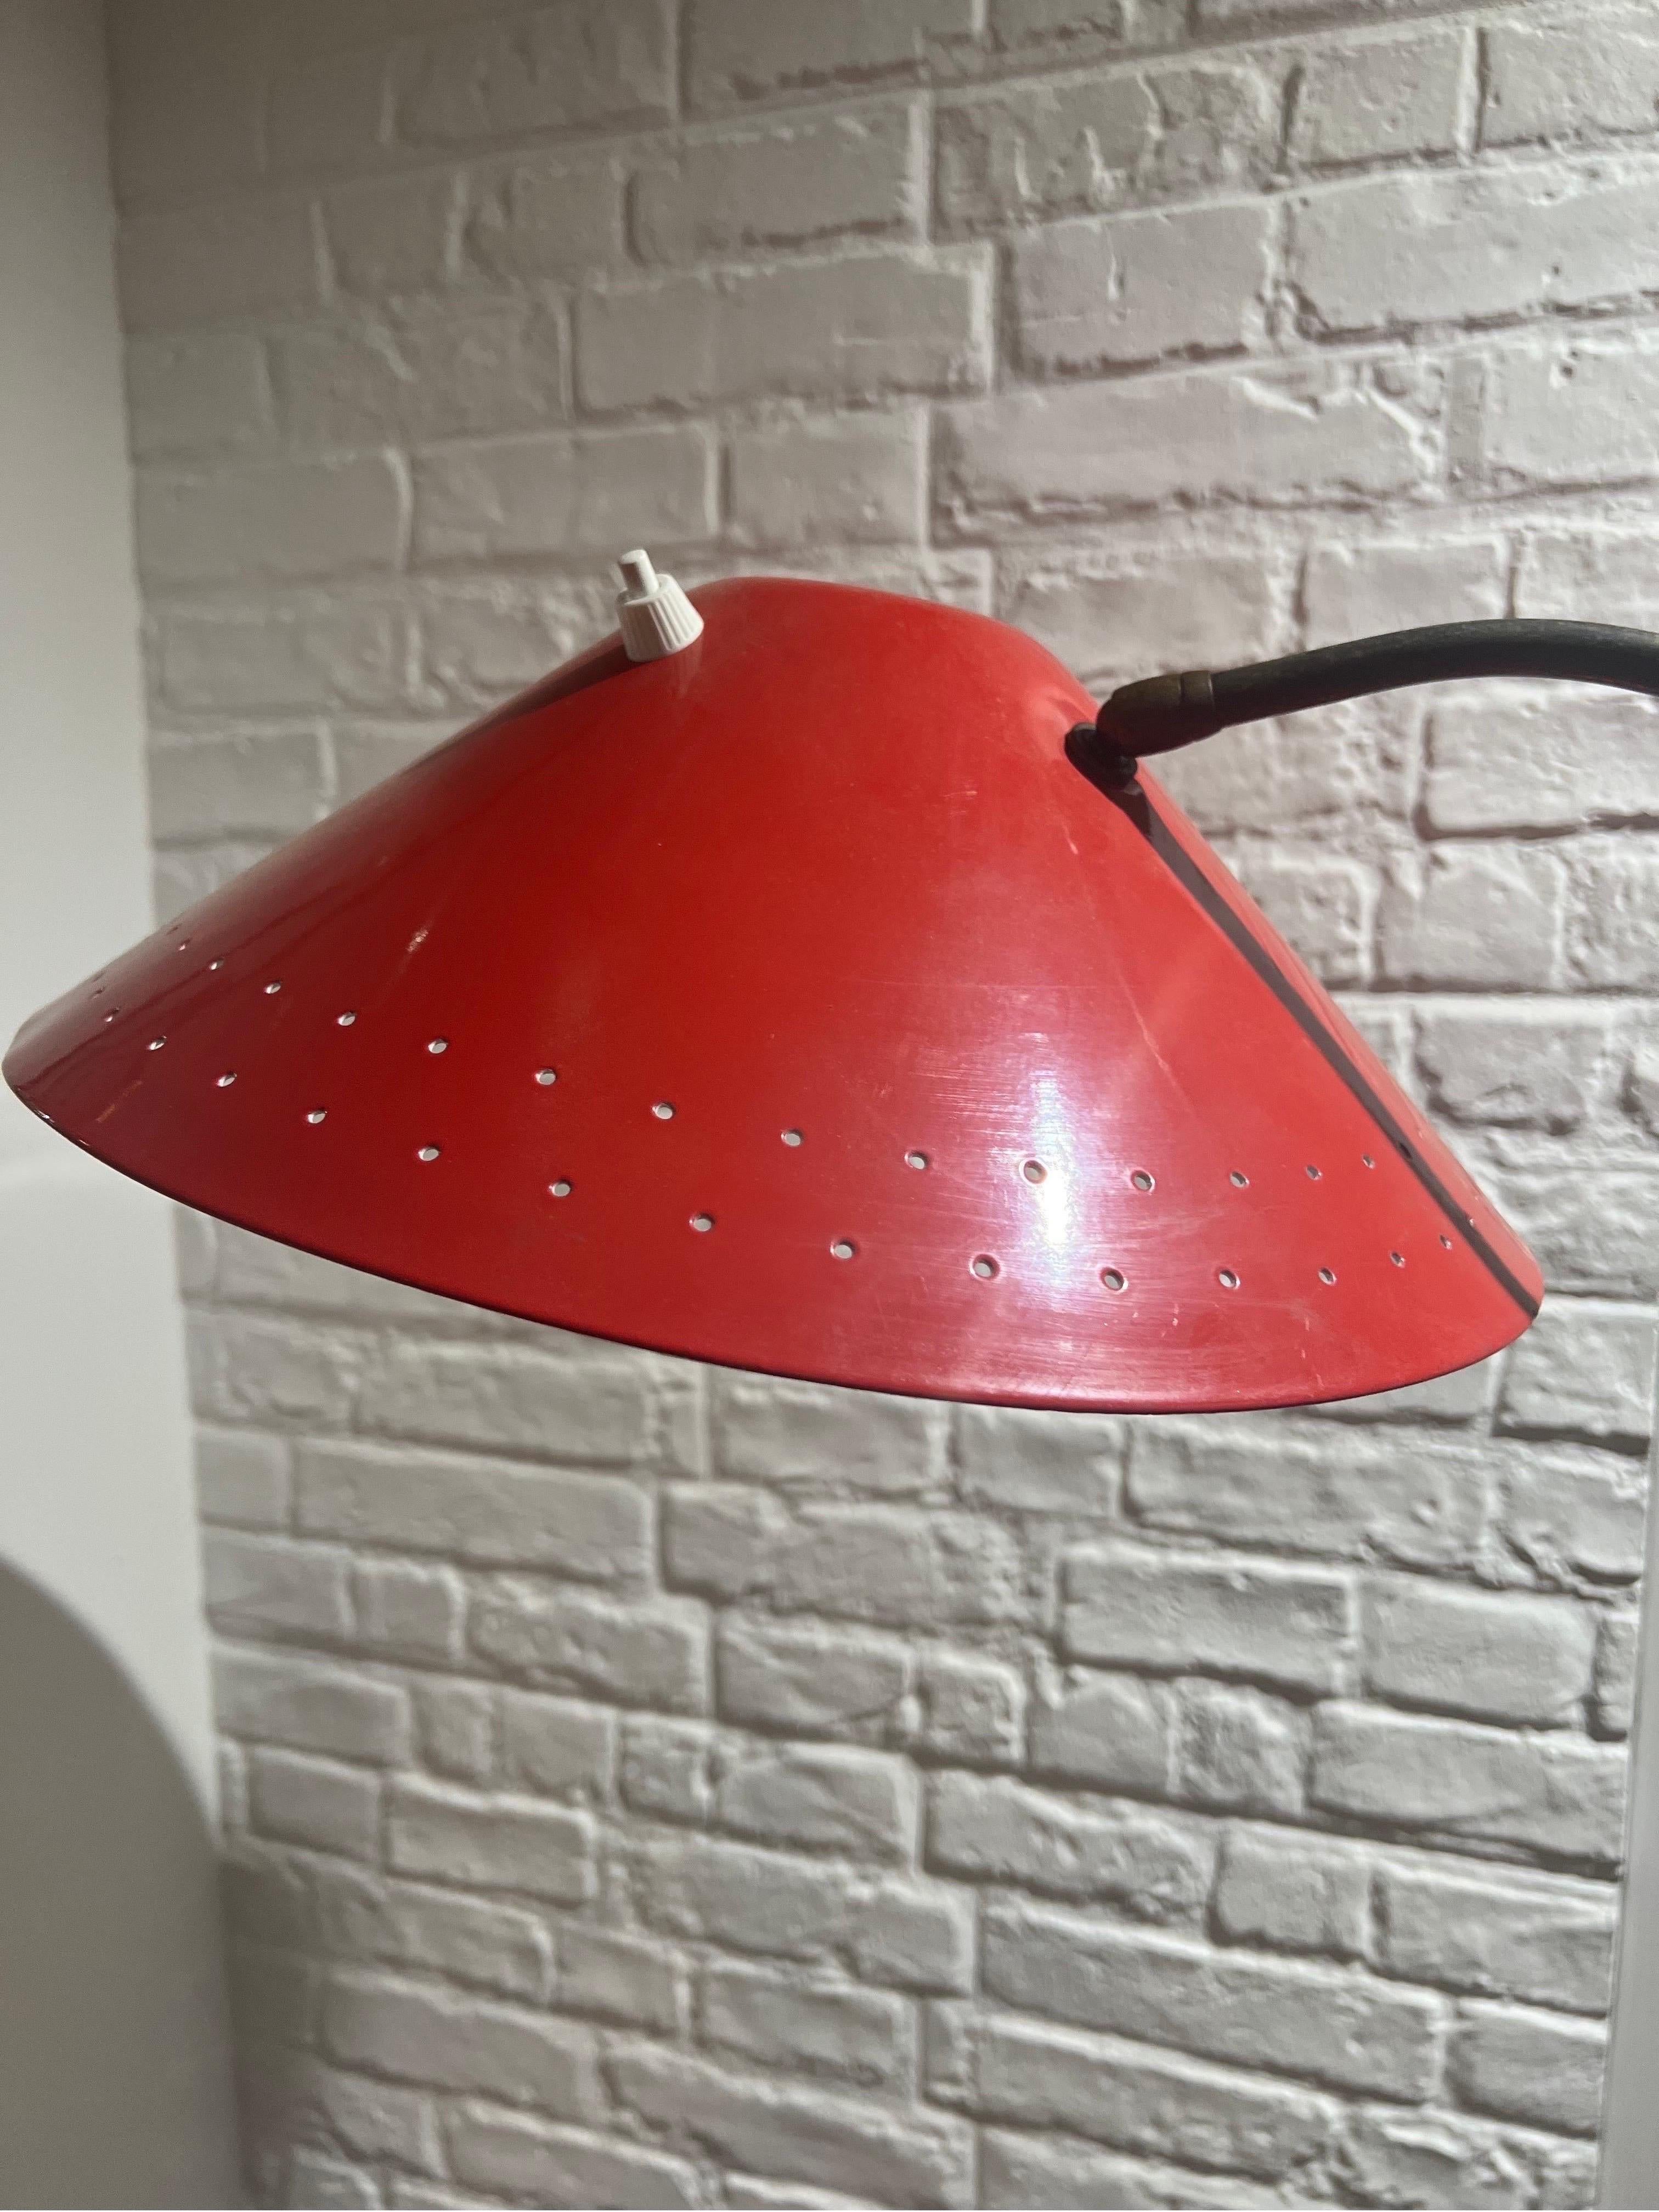 An architectural 2 diffuser uplighter with an additional articulated arm in black and red, supported by a solid brass frame. The design is attributed to Gino Sarfatti.
Please note the measurements for the articulated arm is 115cm when horizontal and